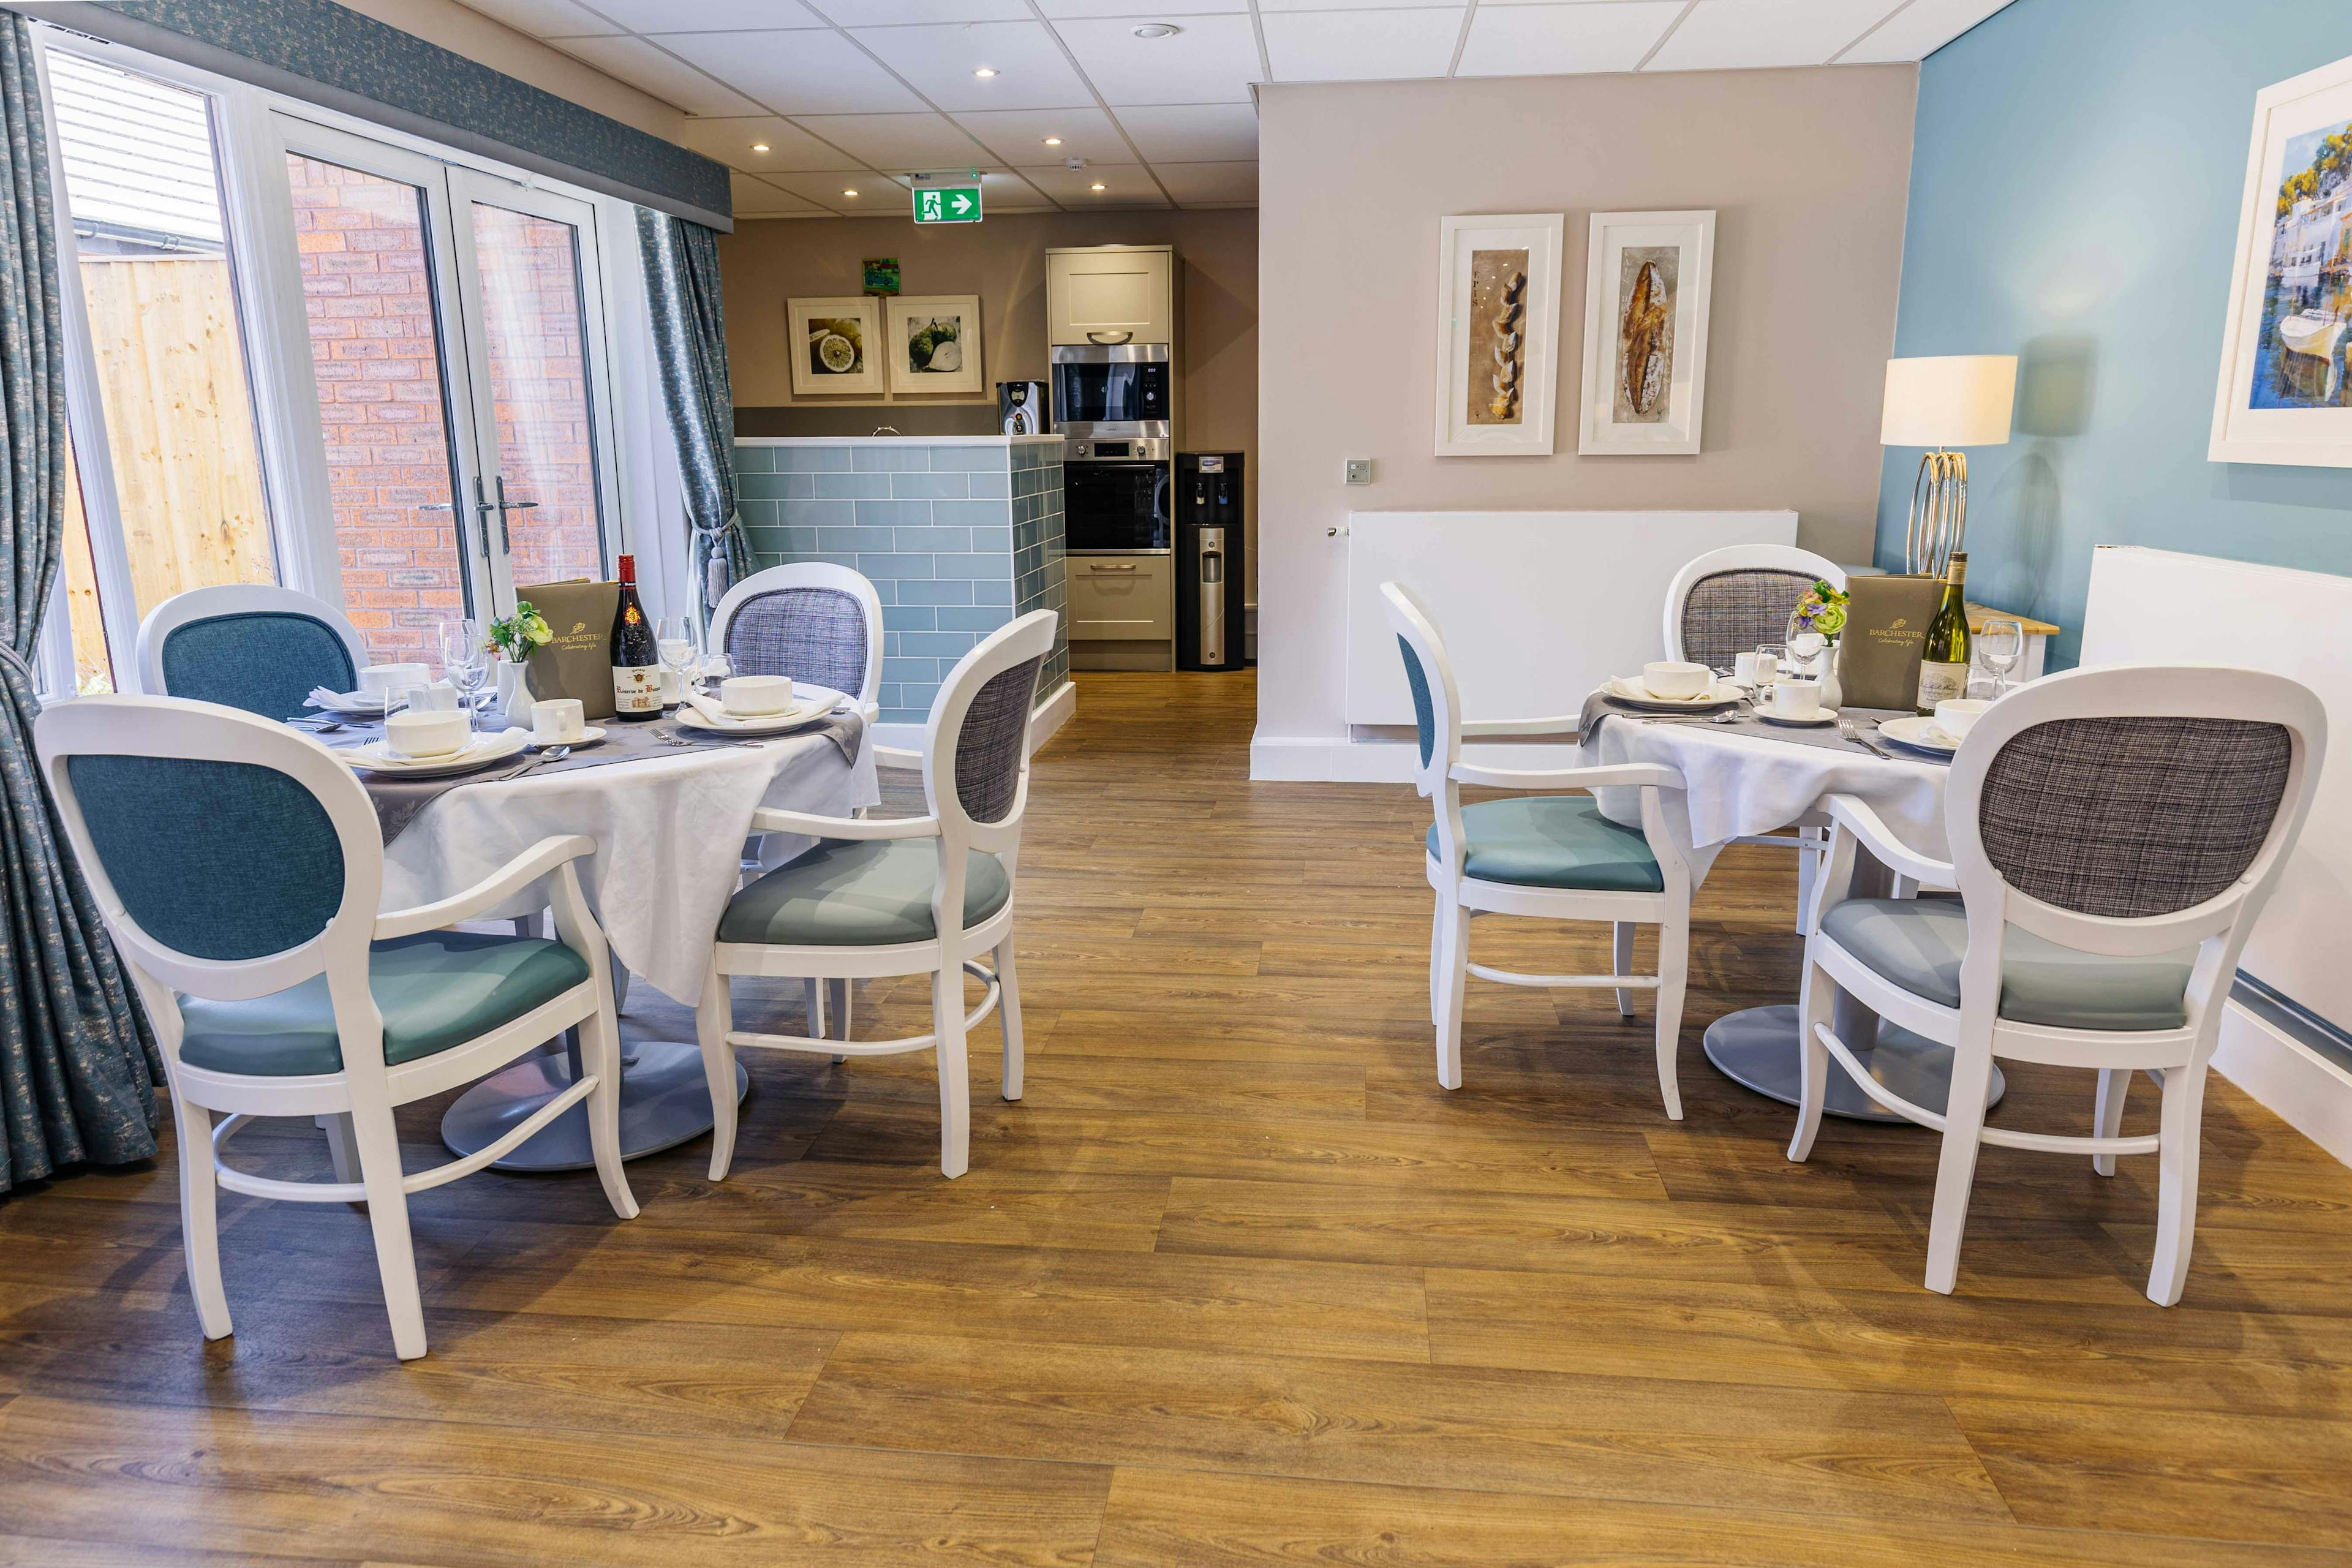 Dining Room at Arbour Court Care Home in Marple, Stockport